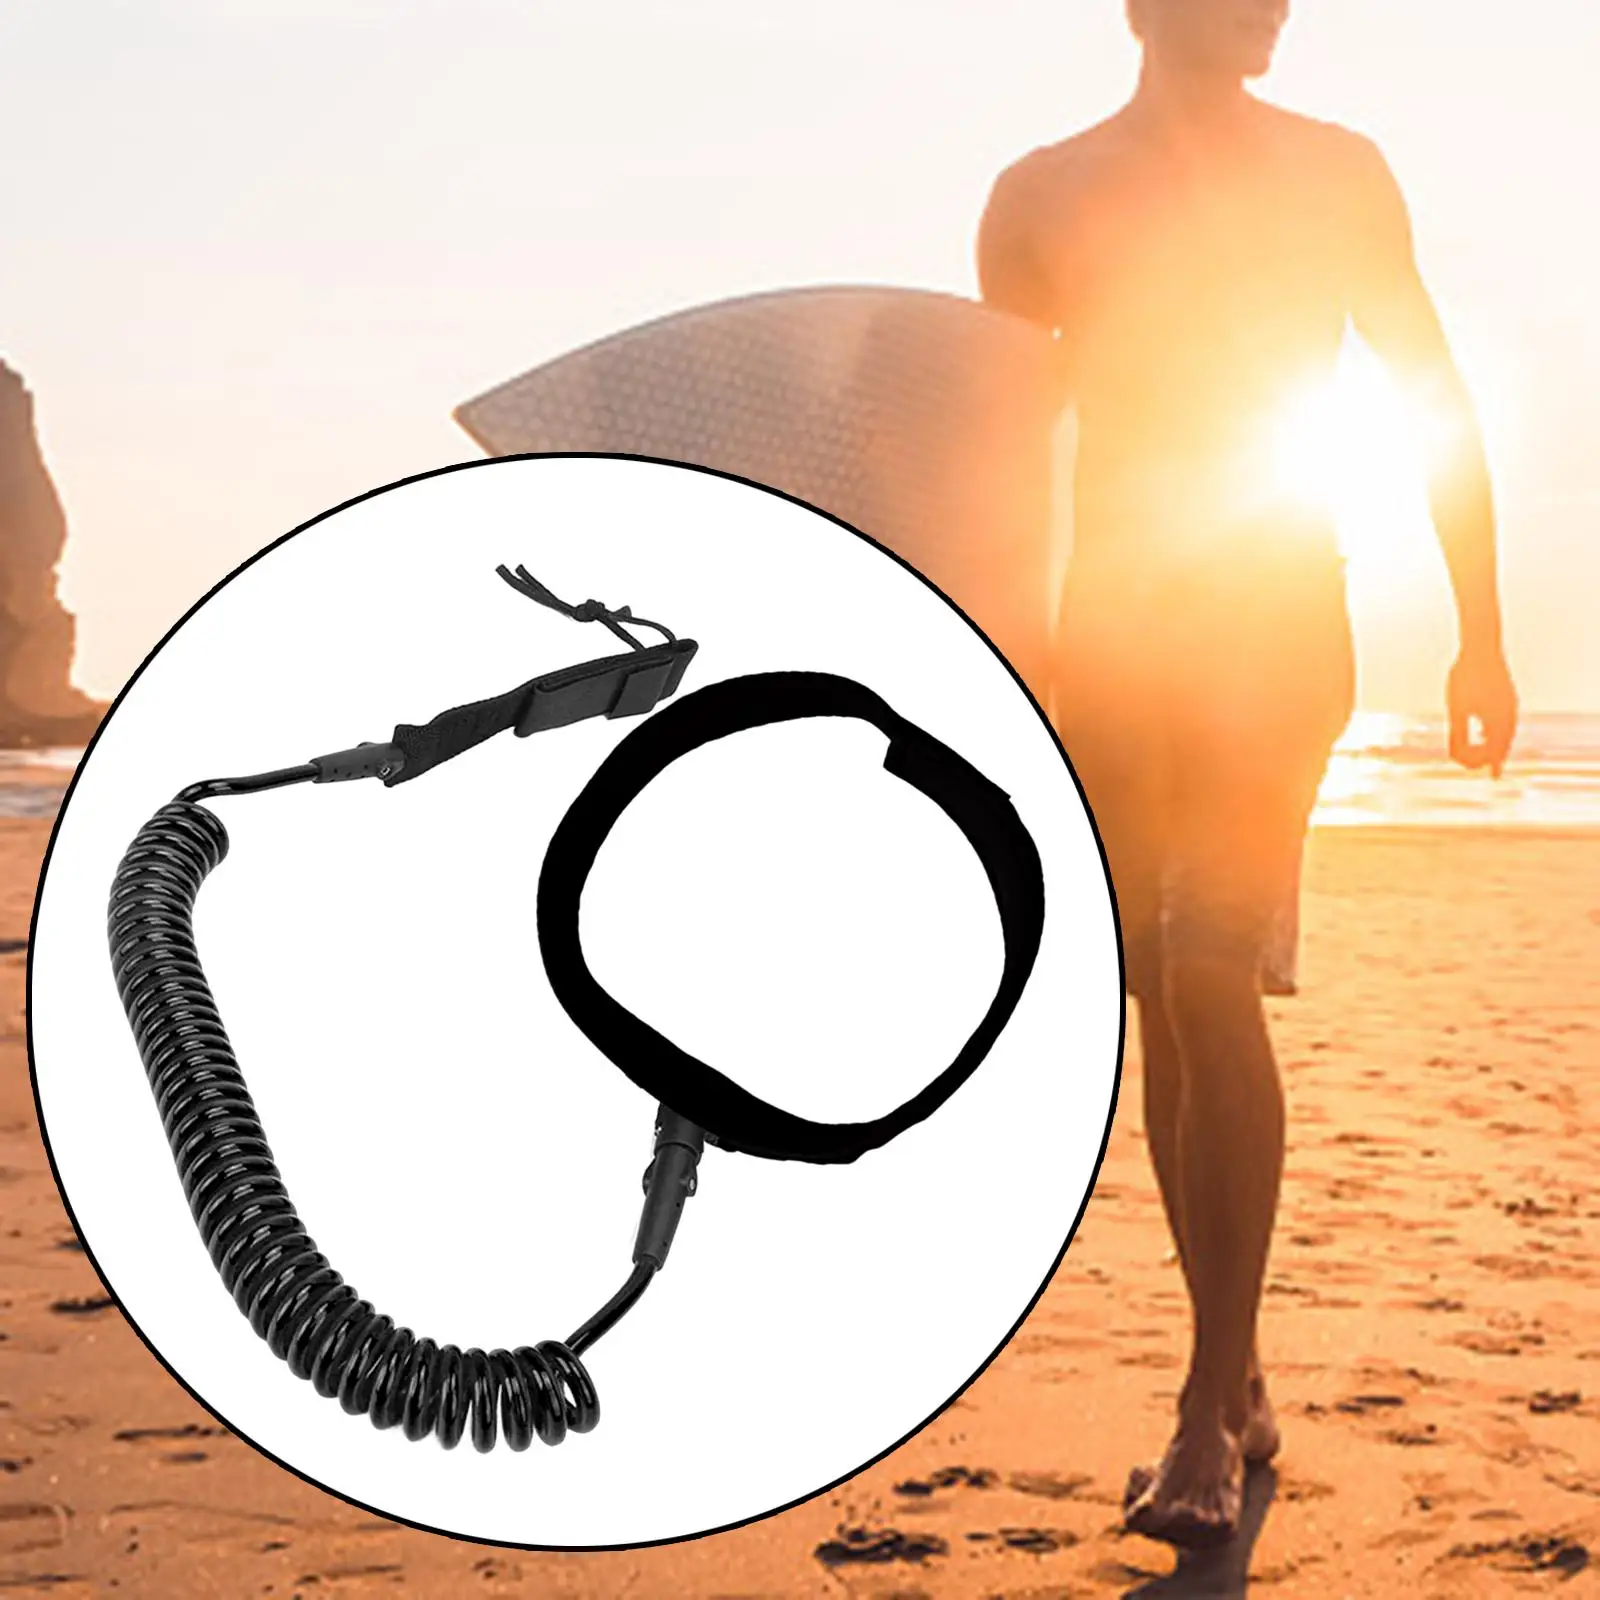 Surf Leash Surf Board Leashes Elastic Cord Coiled Surfboard Leash for All Types of Surfboards Shortboard Longboard Skimboard